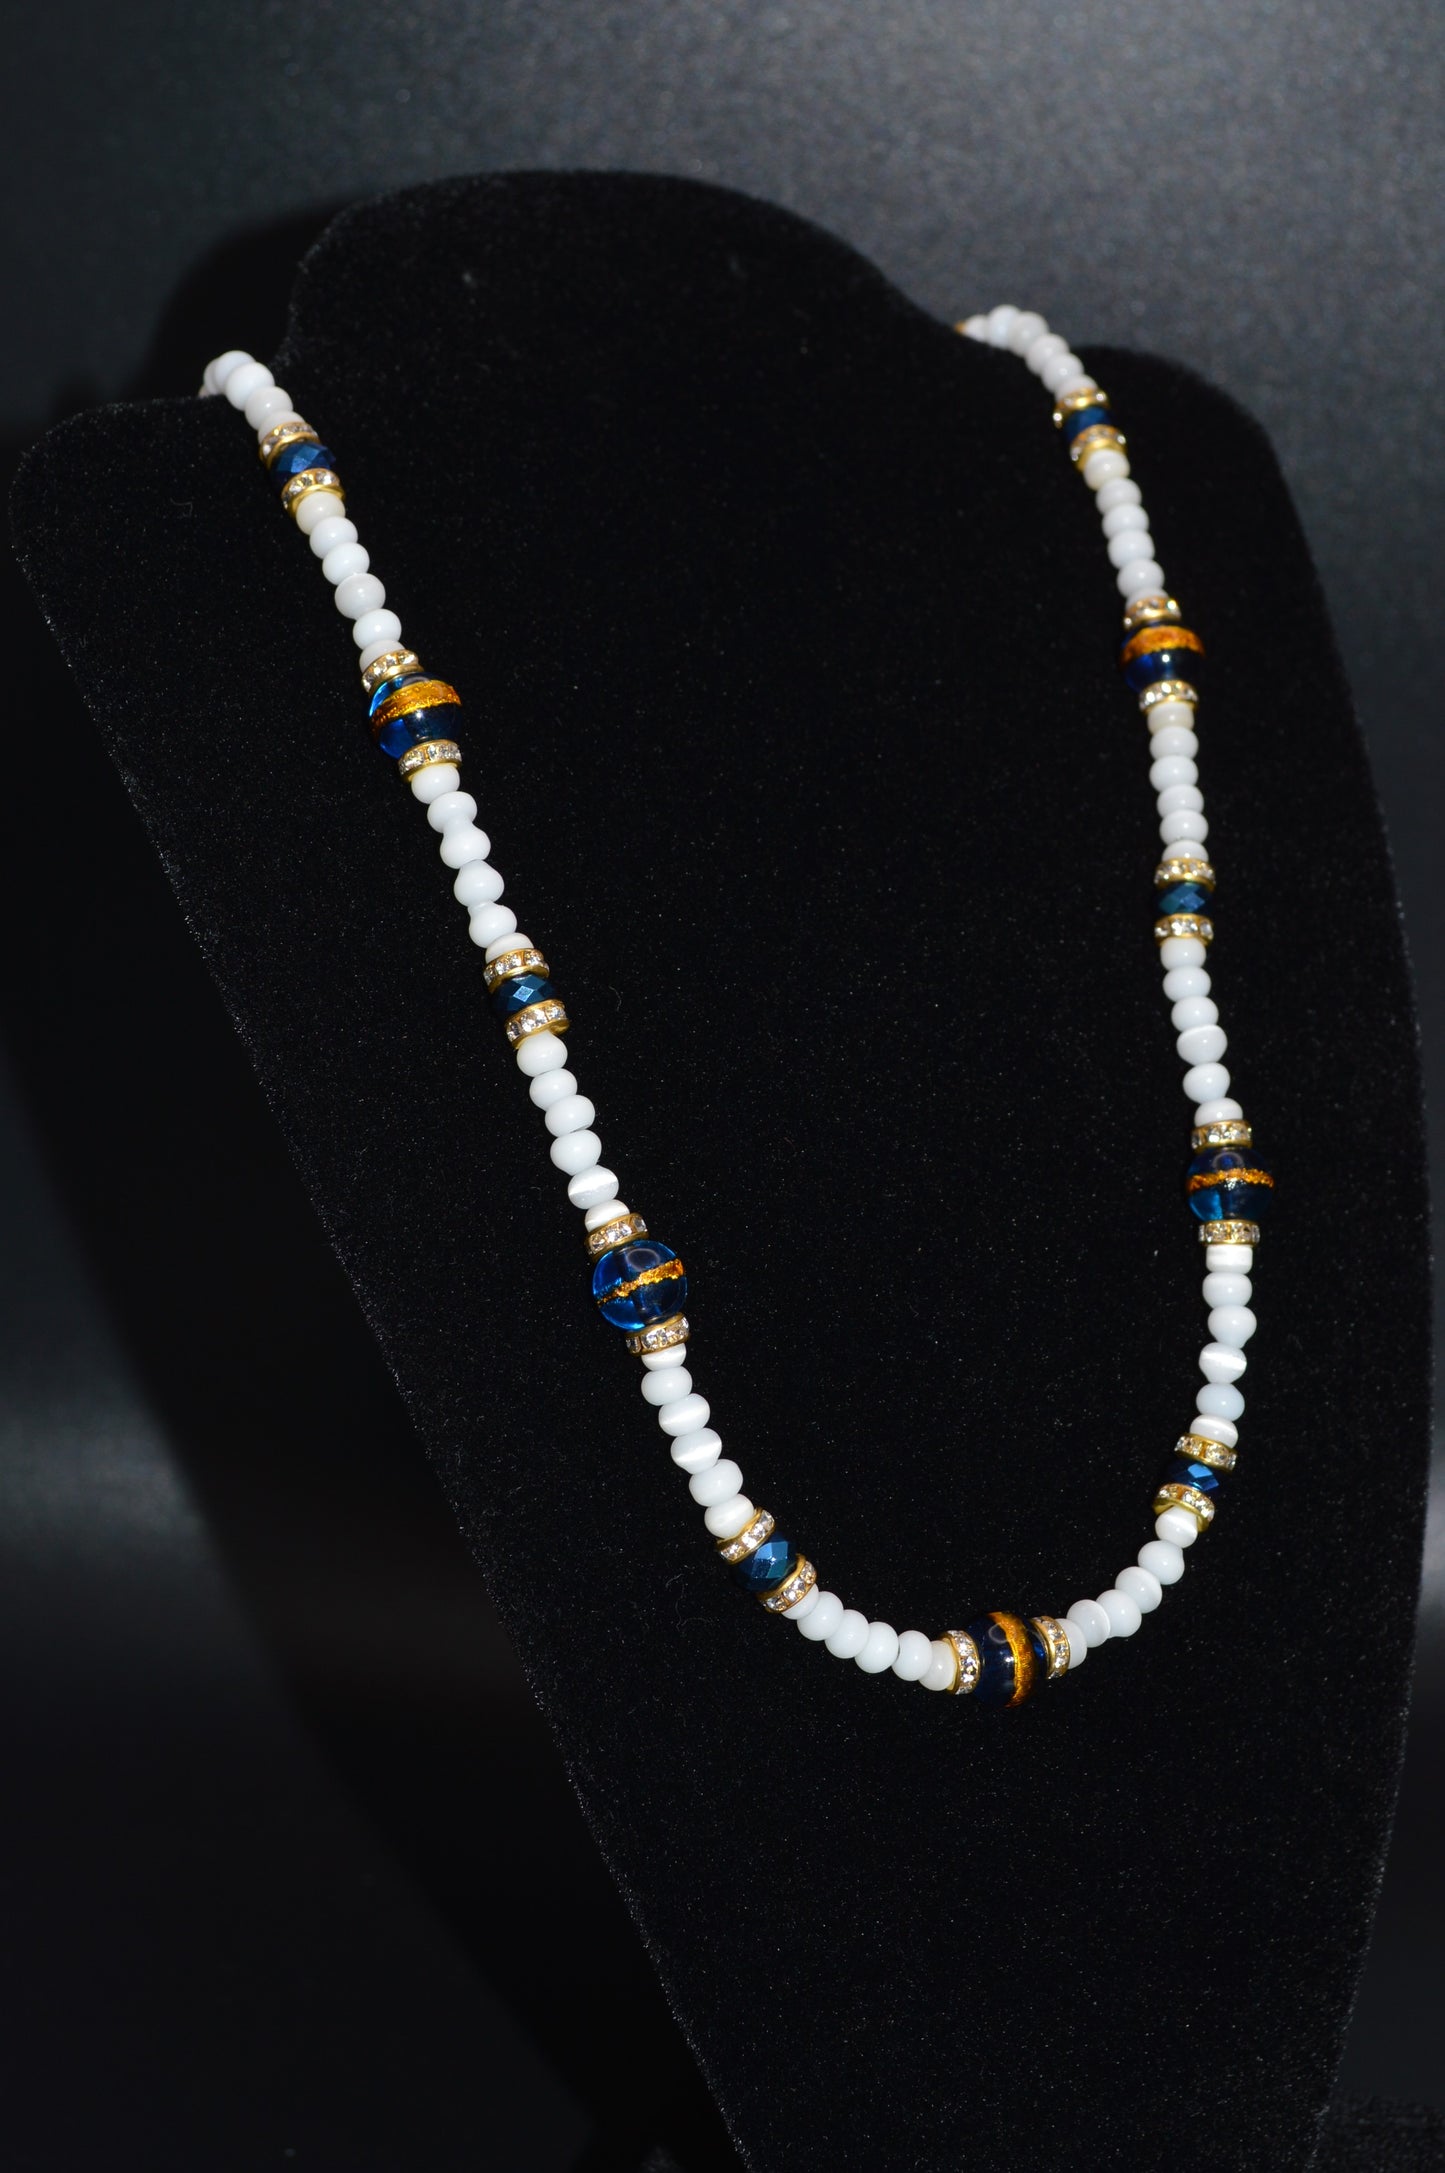 Blue Gold Striped Glass Beads with Cat's Eye Glass Beads and Crystals Necklace